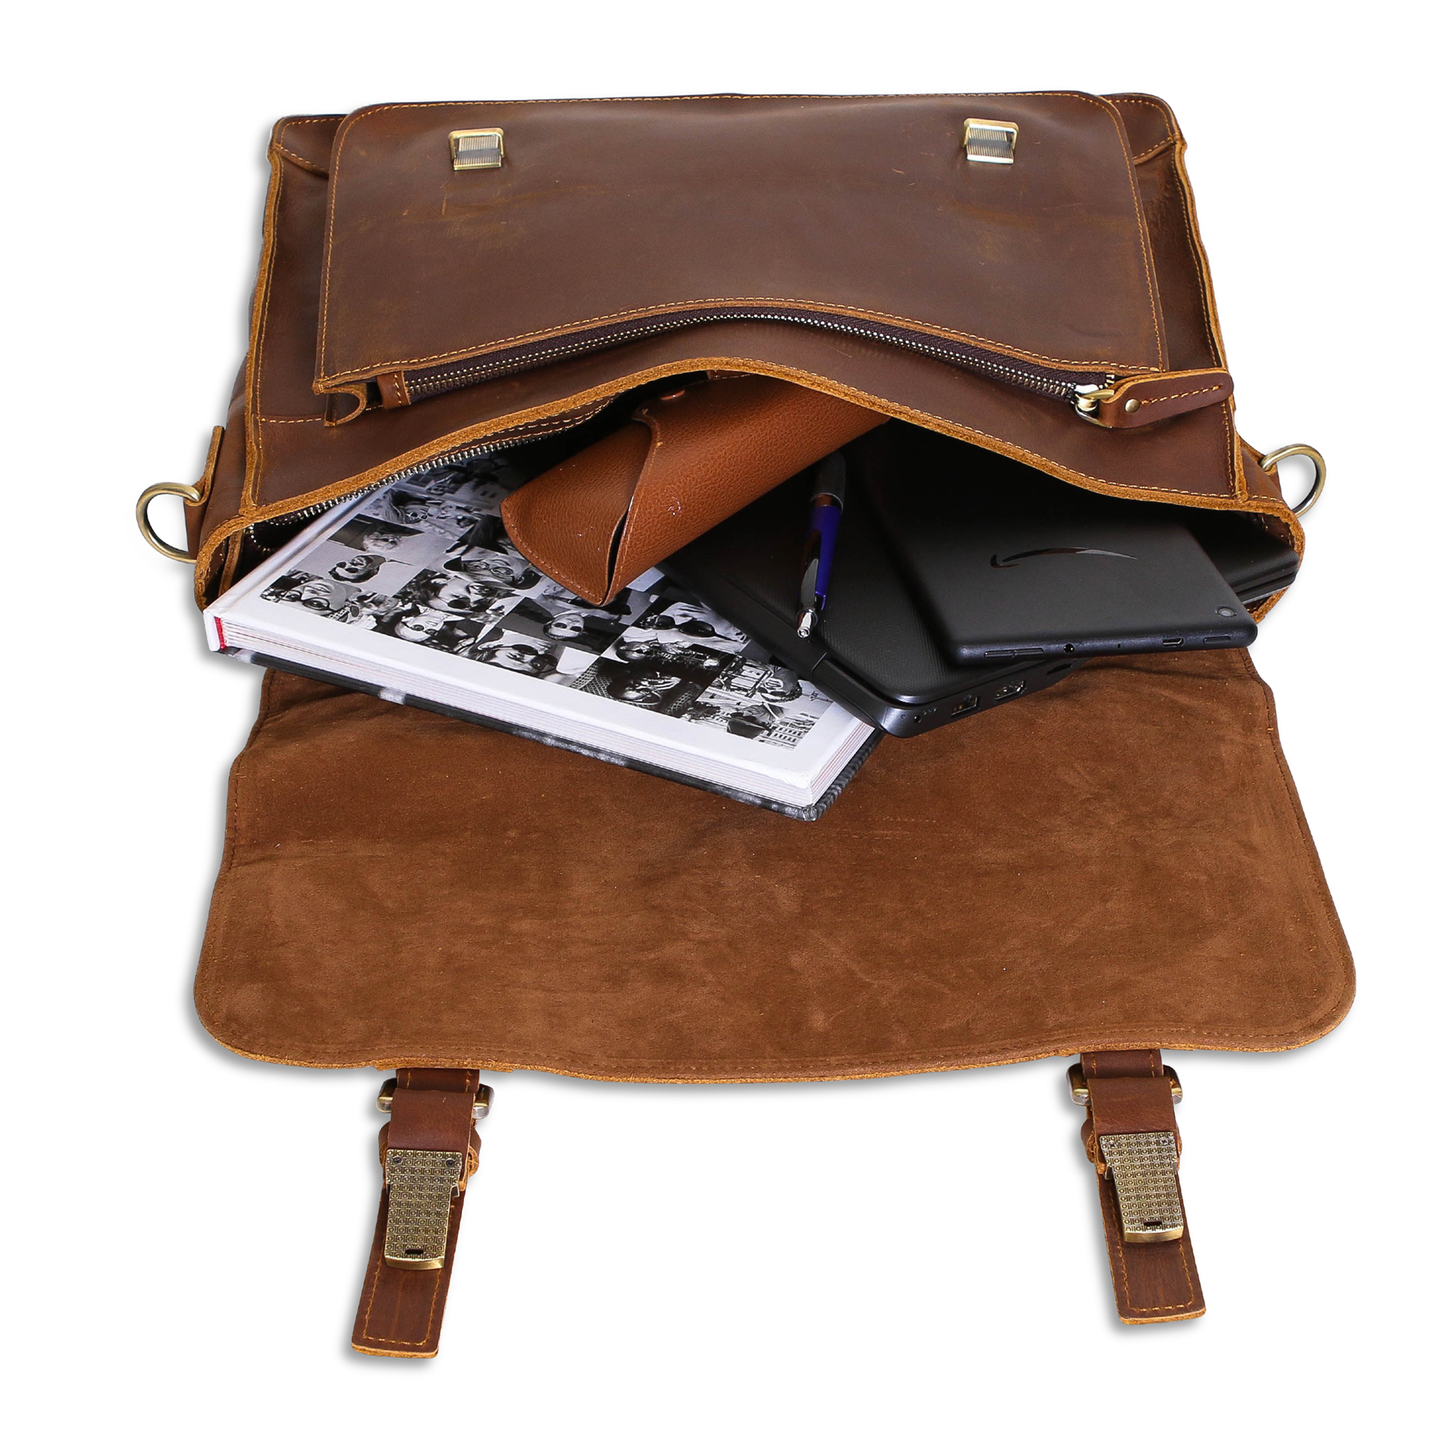 The Daily Men's Leather Messenger Bag for Laptops - Brown Briefcase